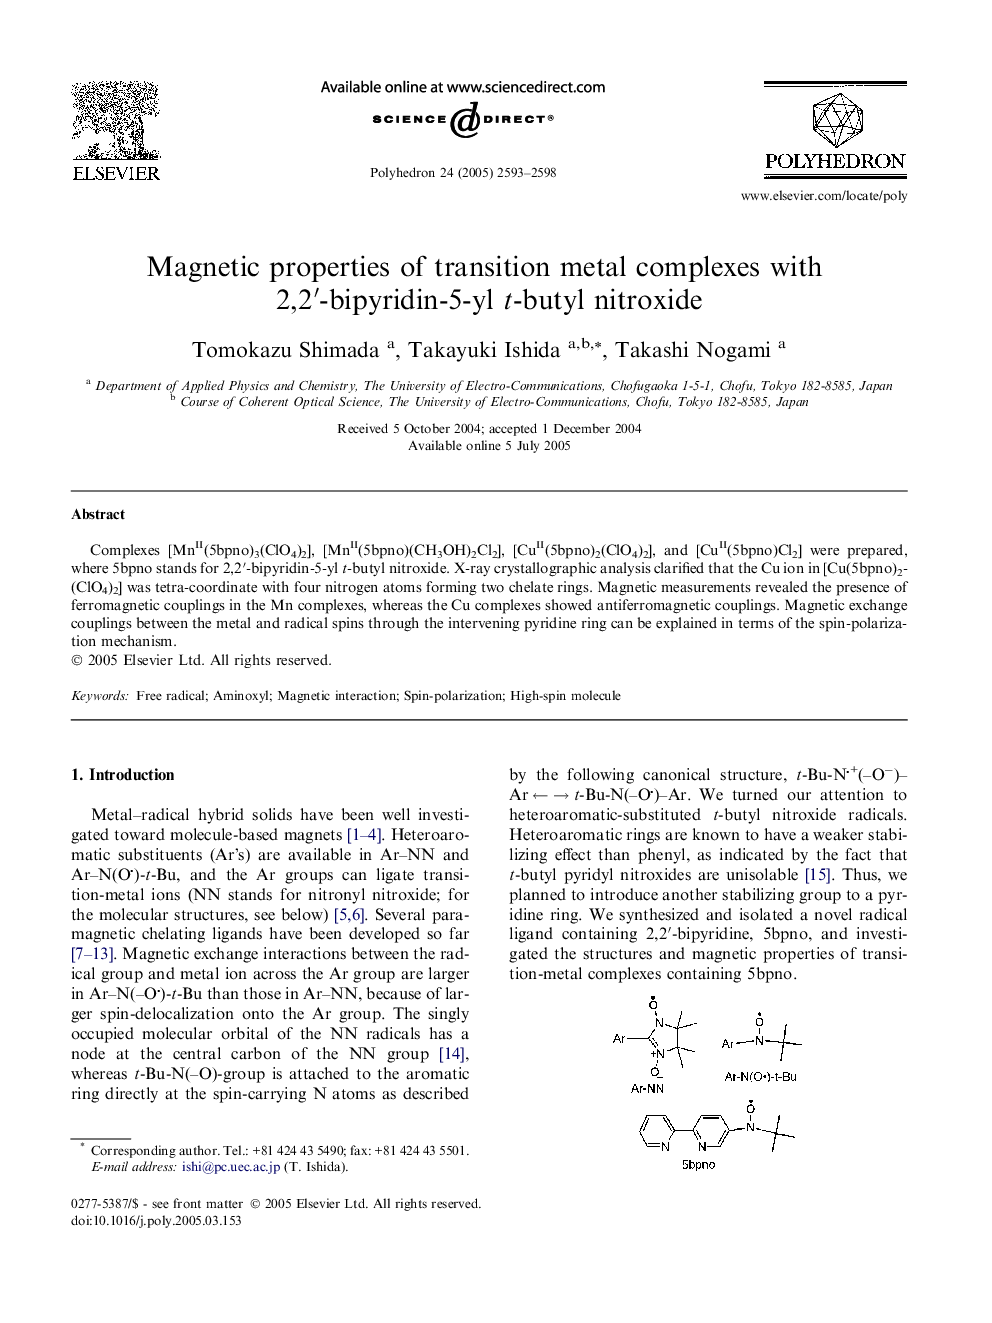 Magnetic properties of transition metal complexes with 2,2′-bipyridin-5-yl t-butyl nitroxide